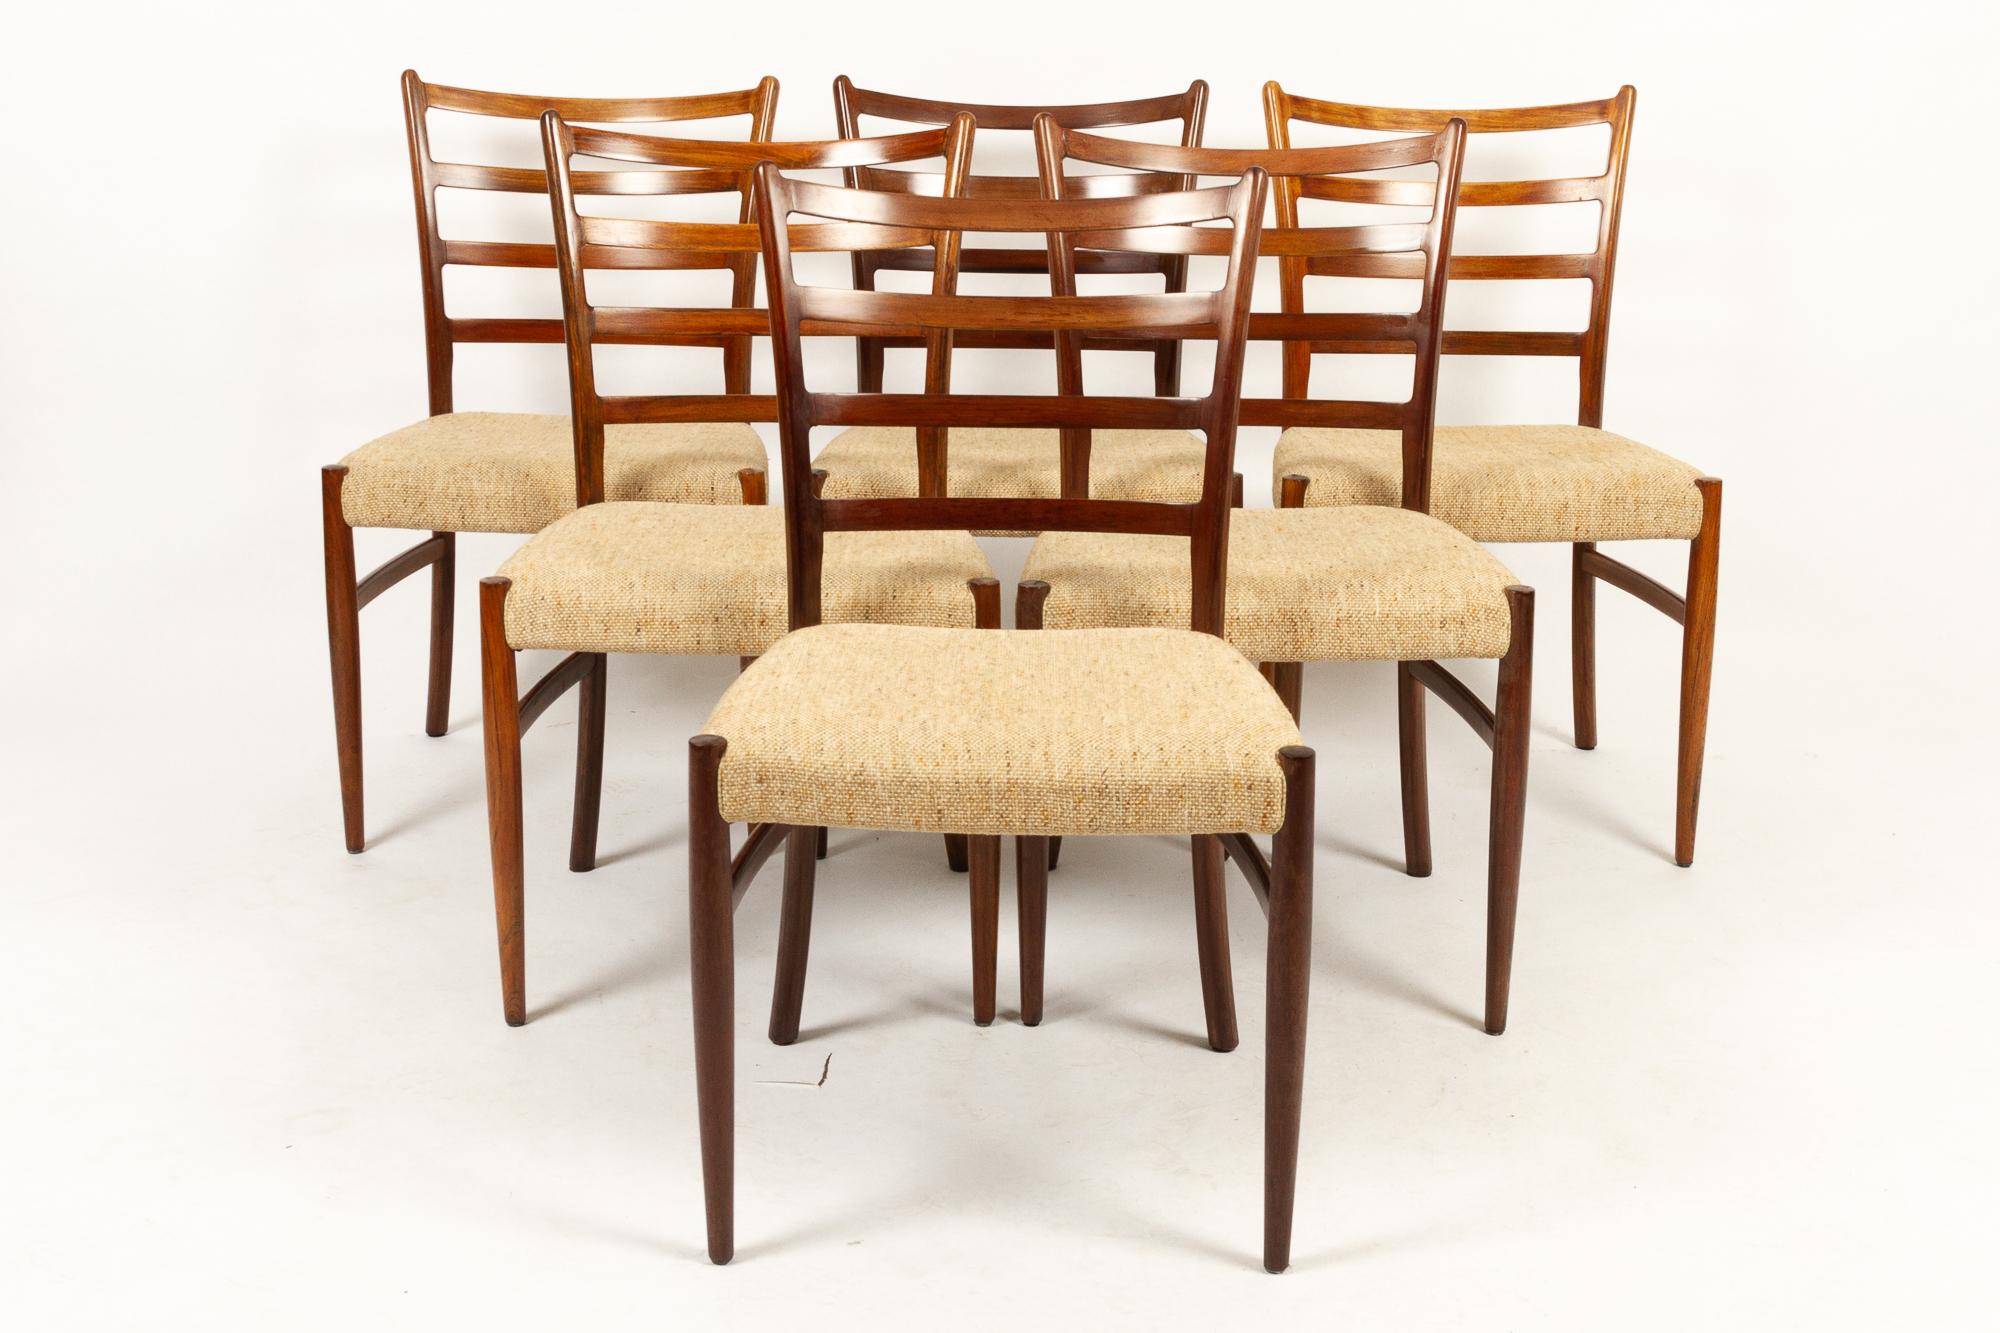 Danish rosewood dining chairs by Schou Andersen ( SVA Møbler ) 1960s. Attributed to Danish designer Johannes Andersen.
Set of six ladder back rosewood dining chairs with original wool upholstery. Round tapered legs. Outward curving hind legs.